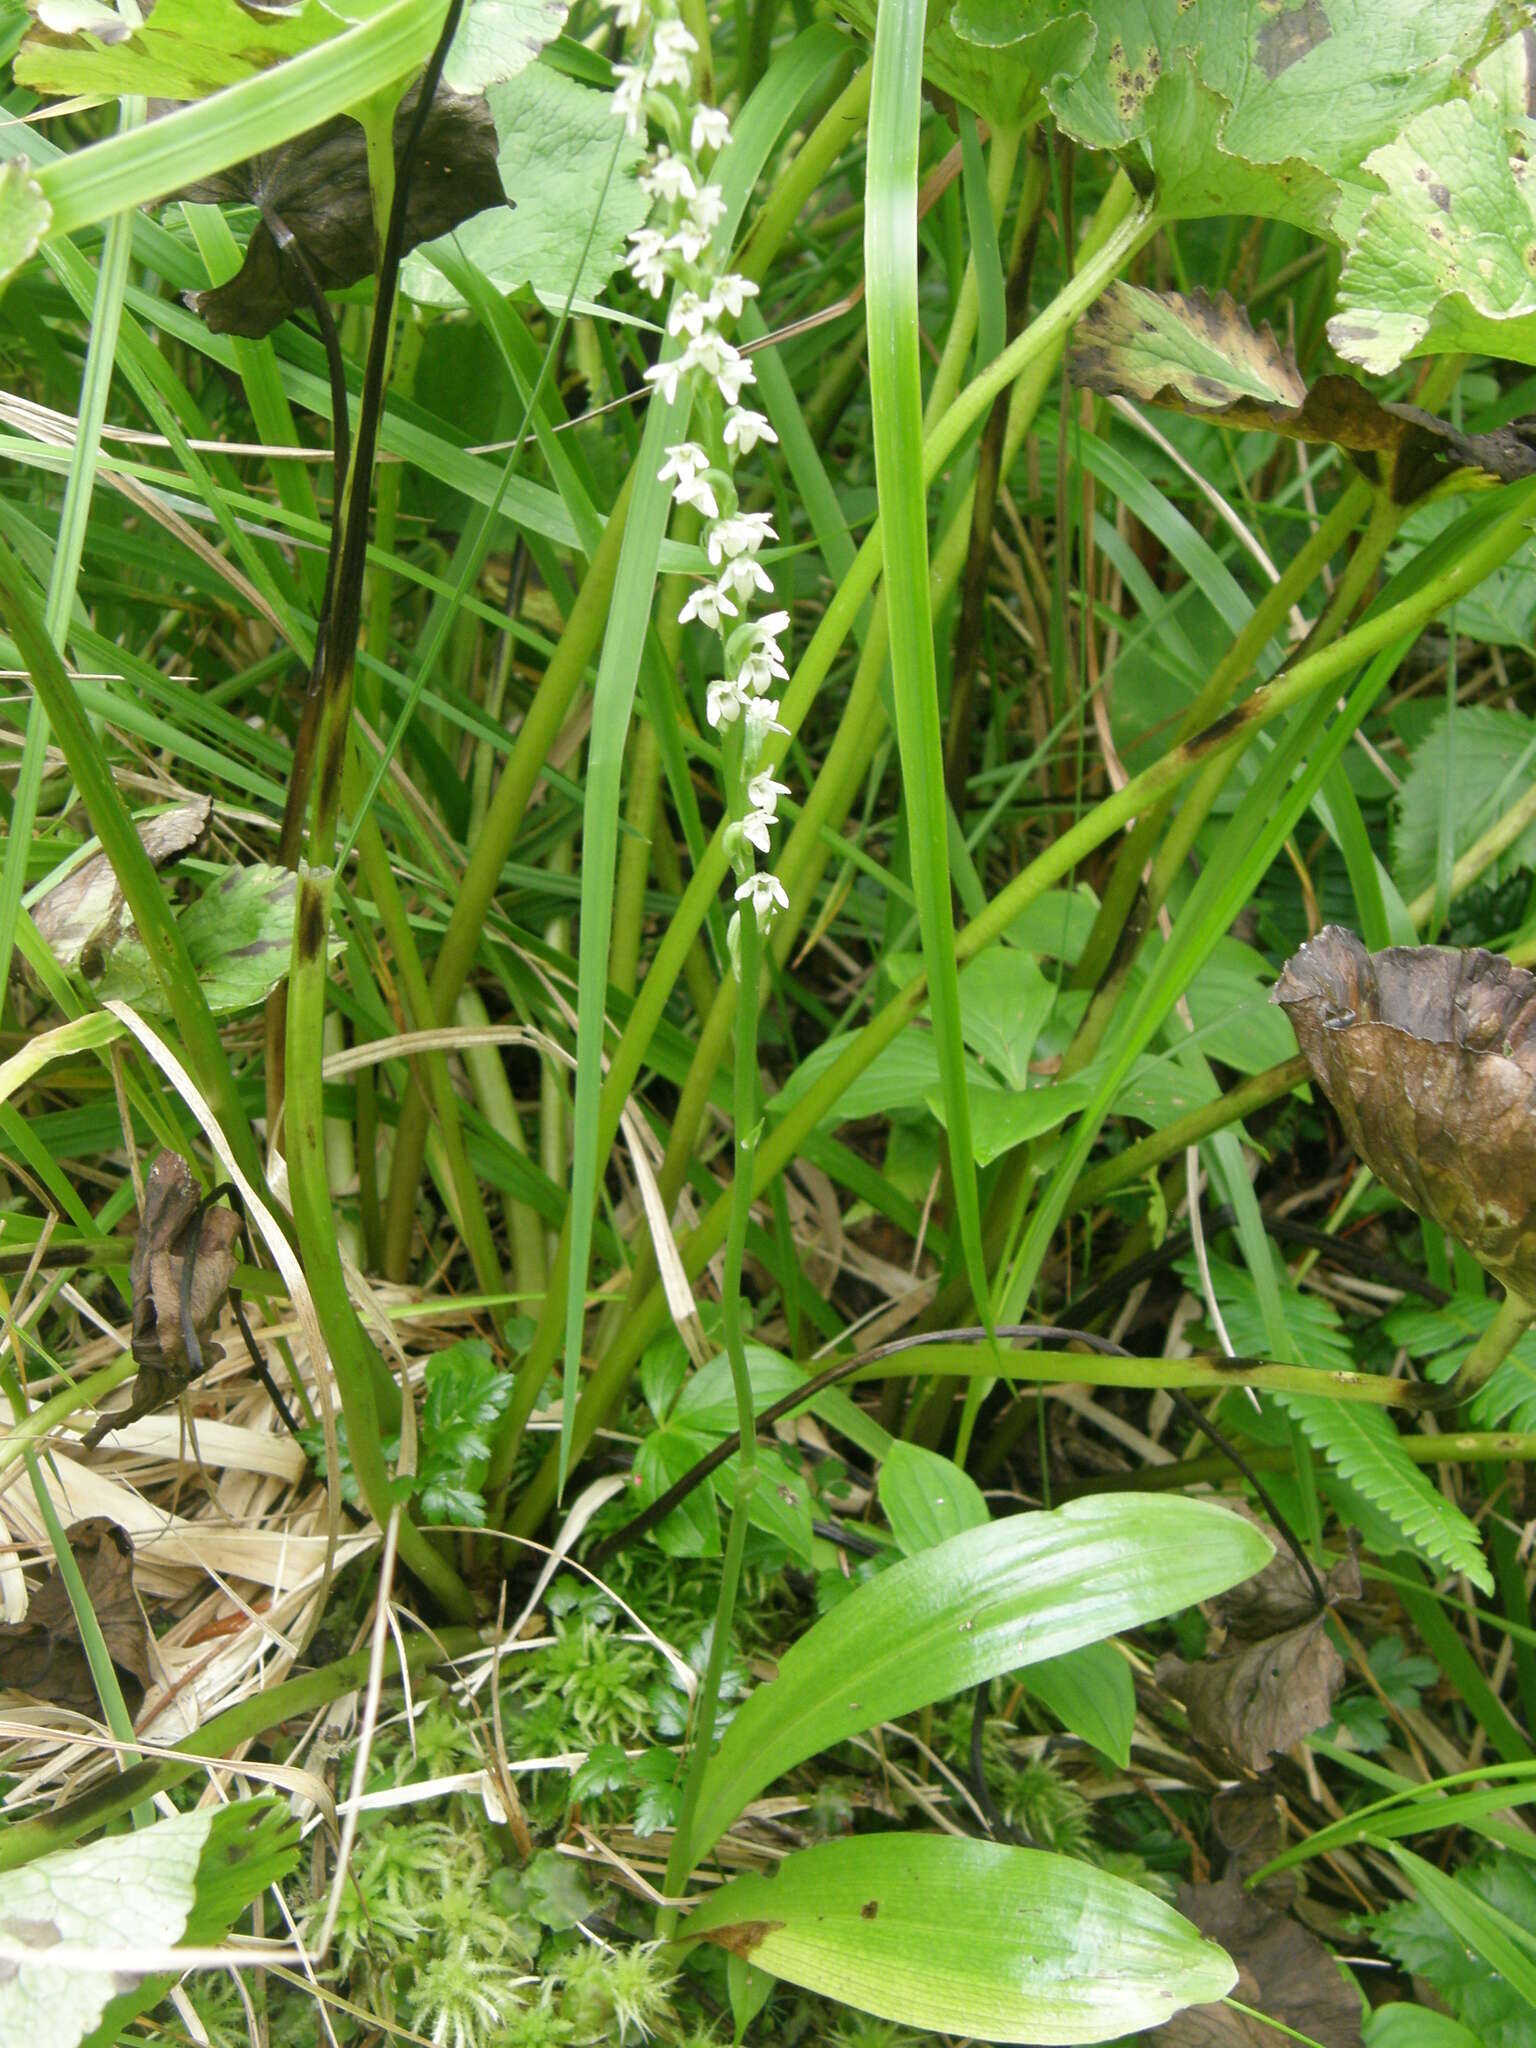 Image of whiteflower rein orchid